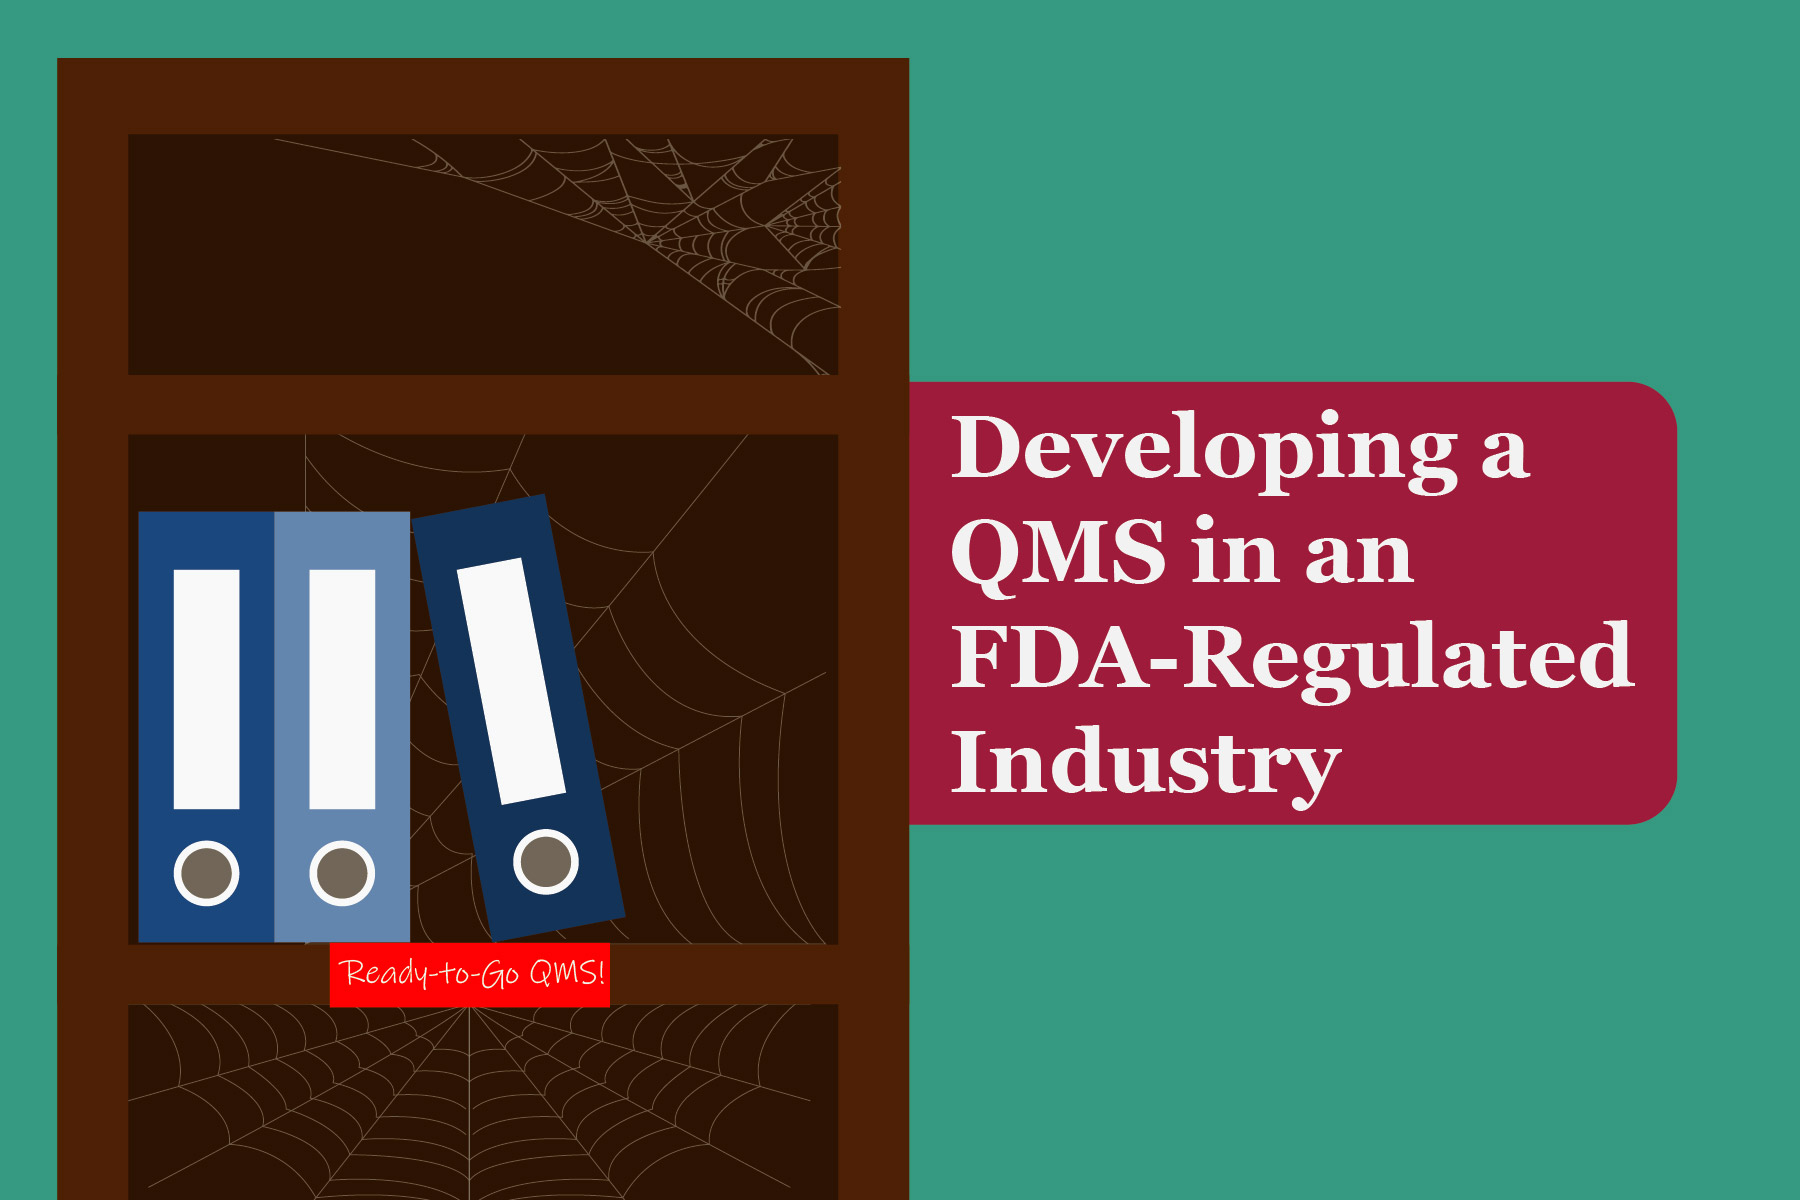 Developing a QMS in an FDA-Regulated Industry